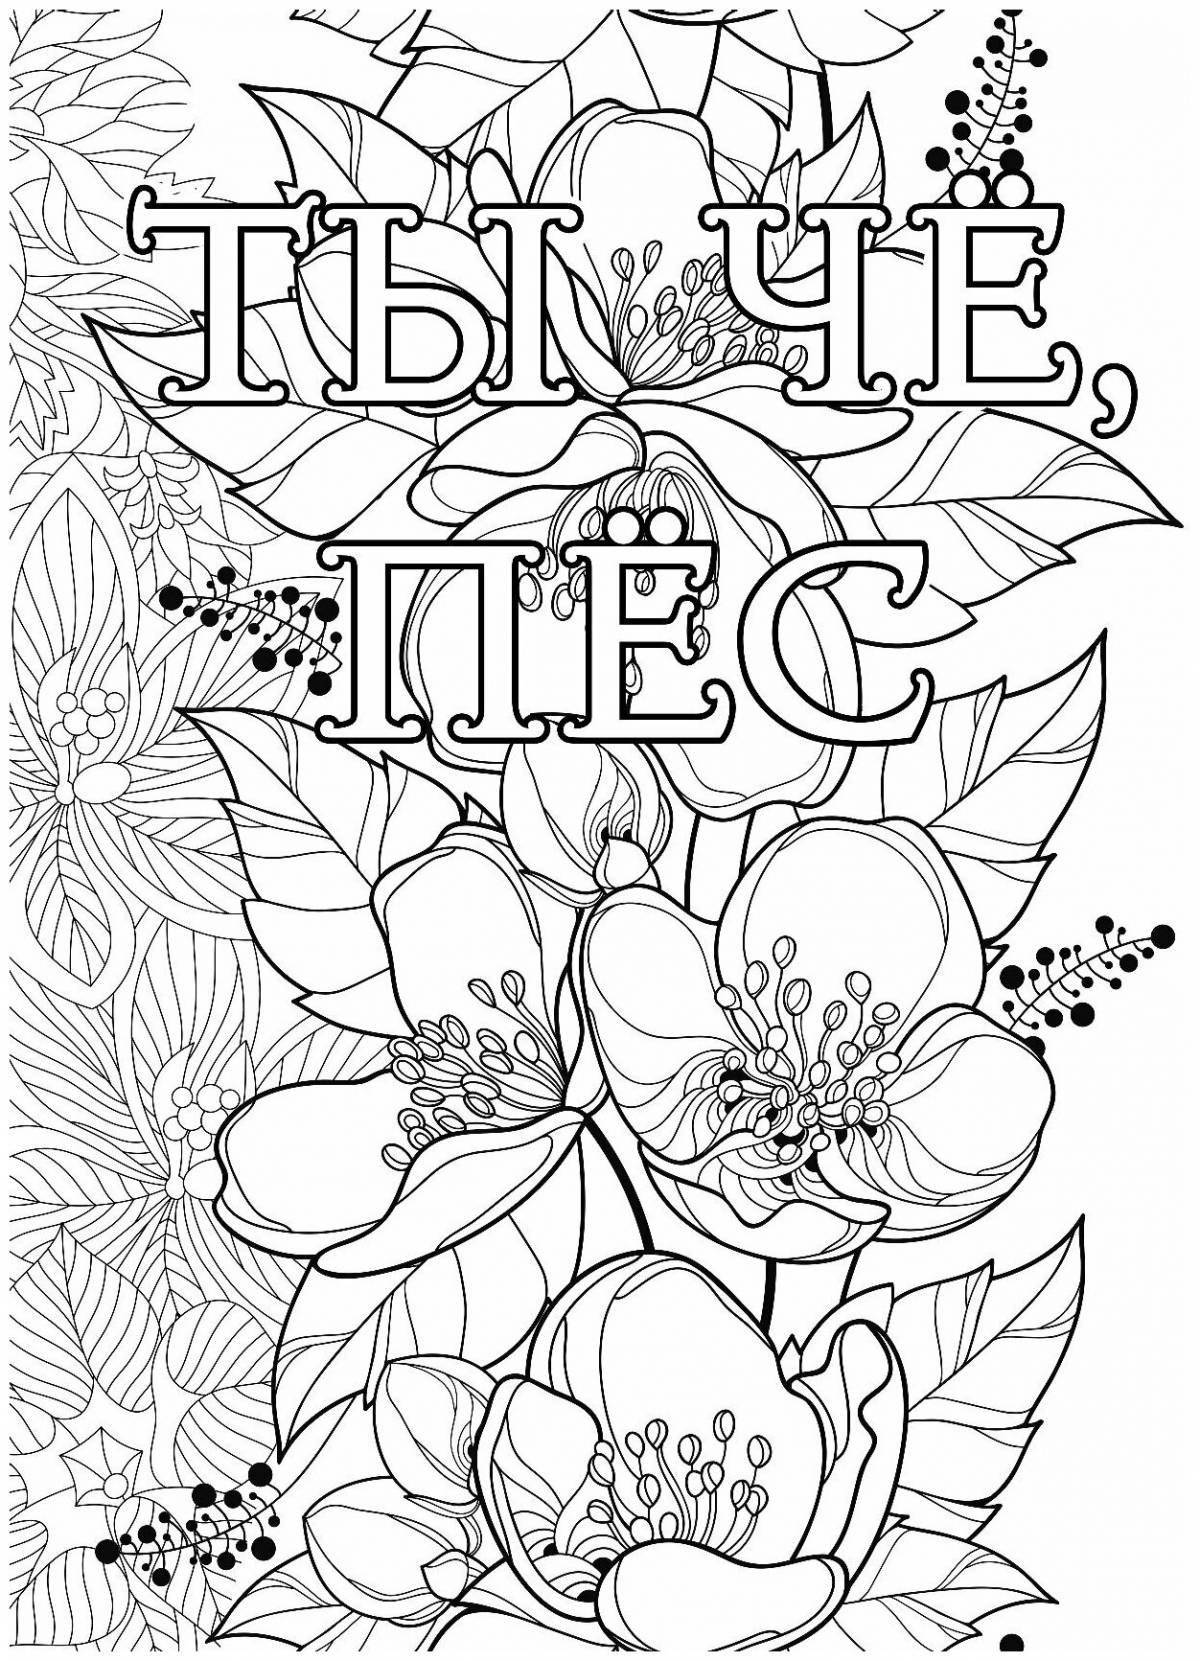 Uplifting you annoy me antistress coloring book